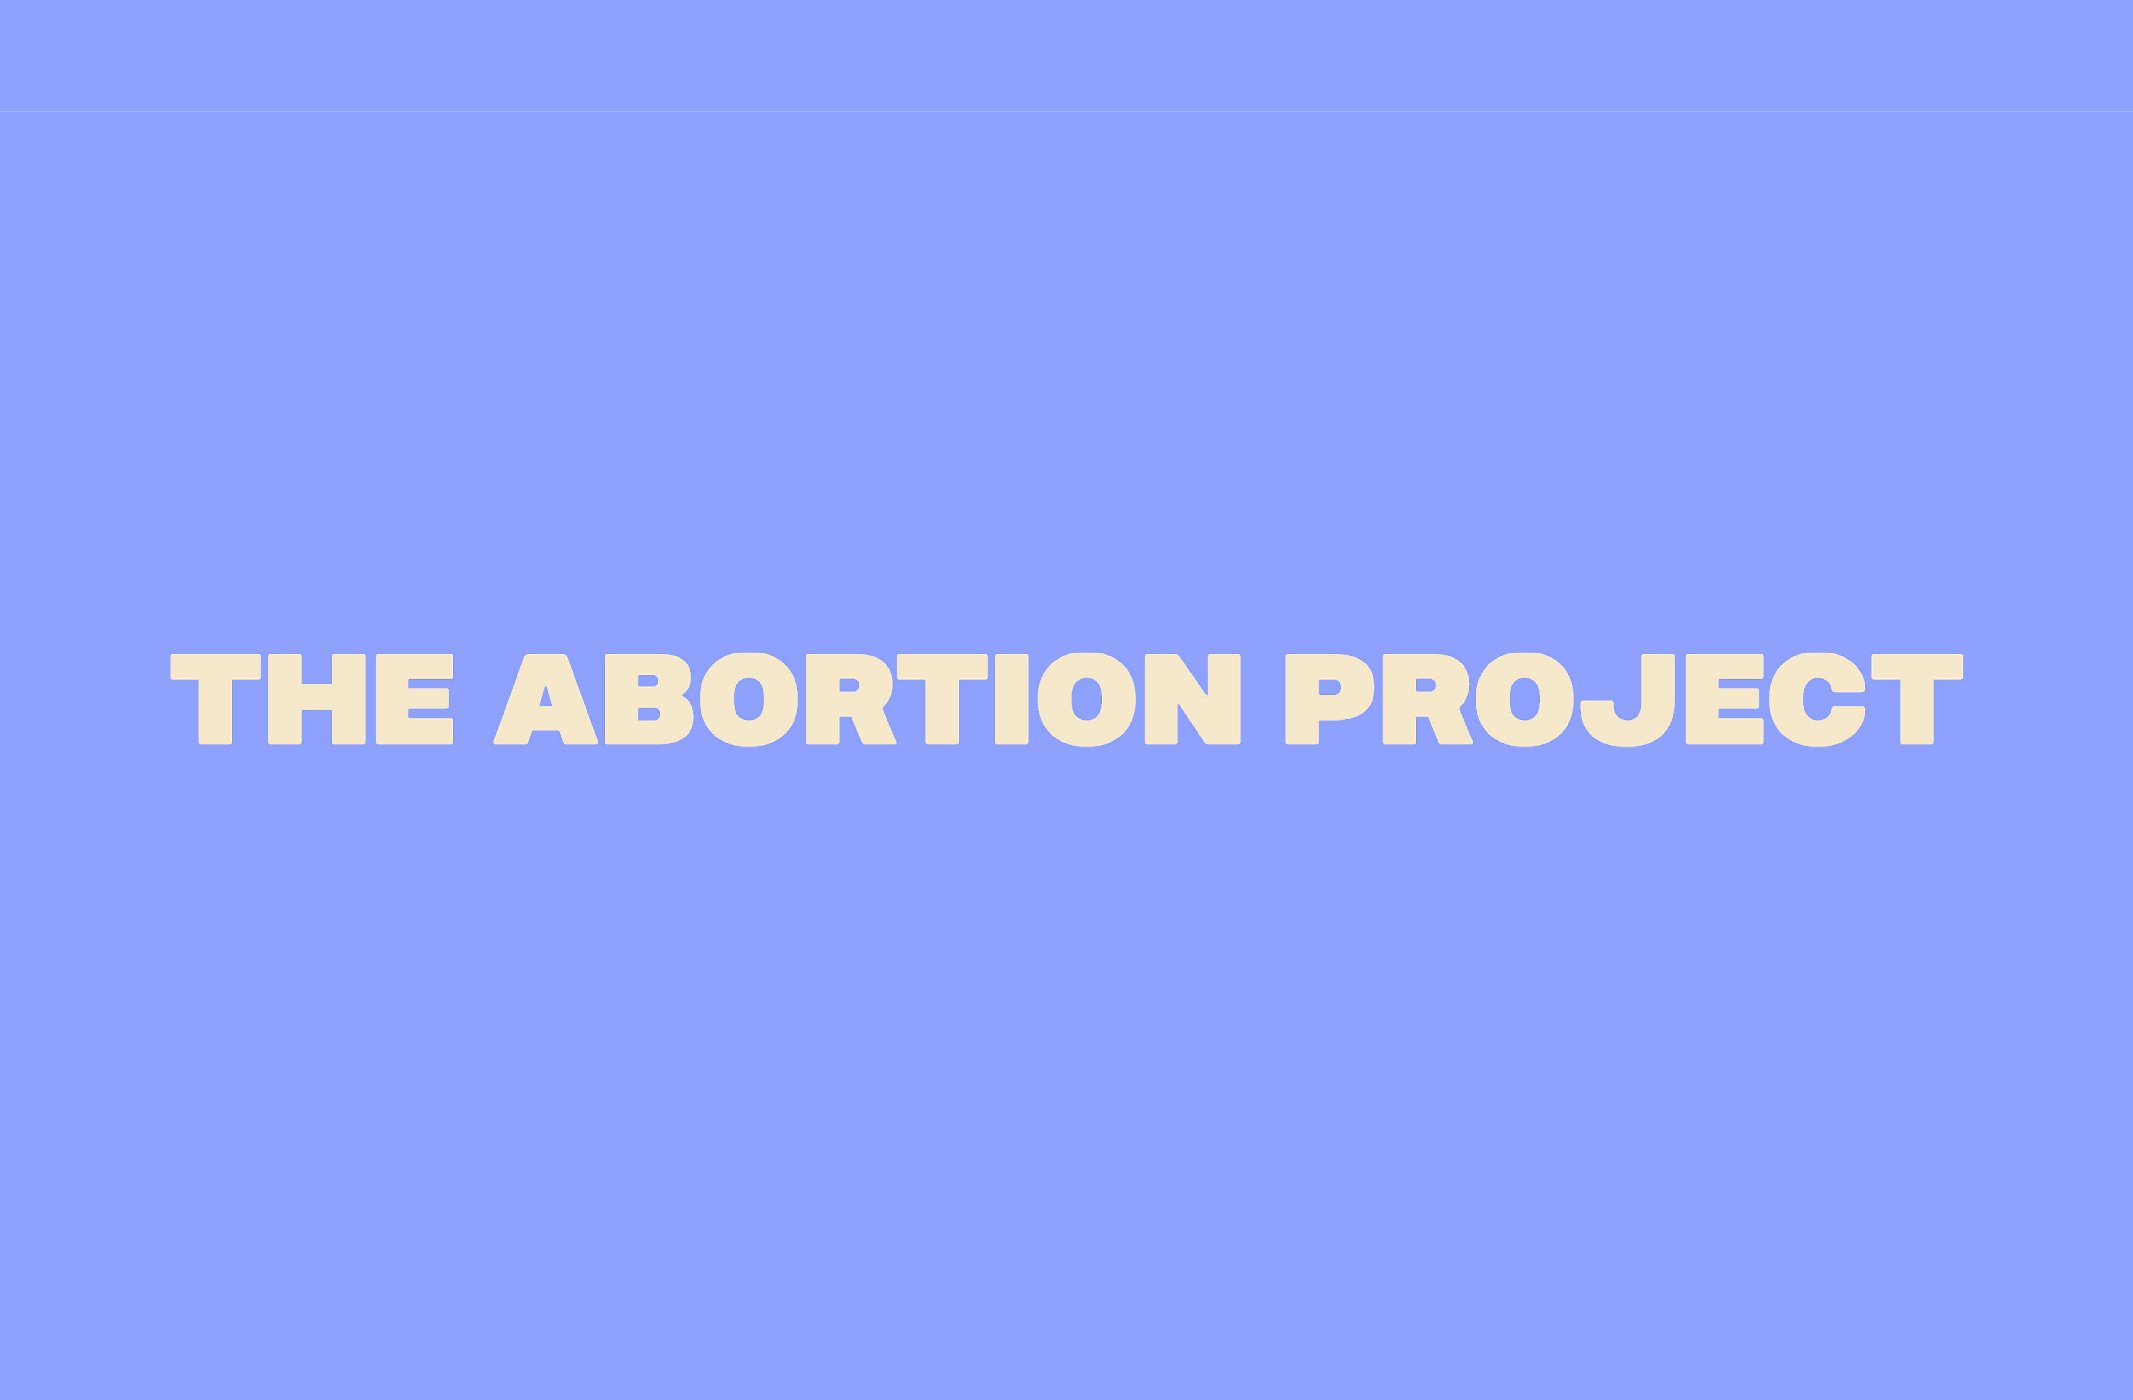 The Abortion Project